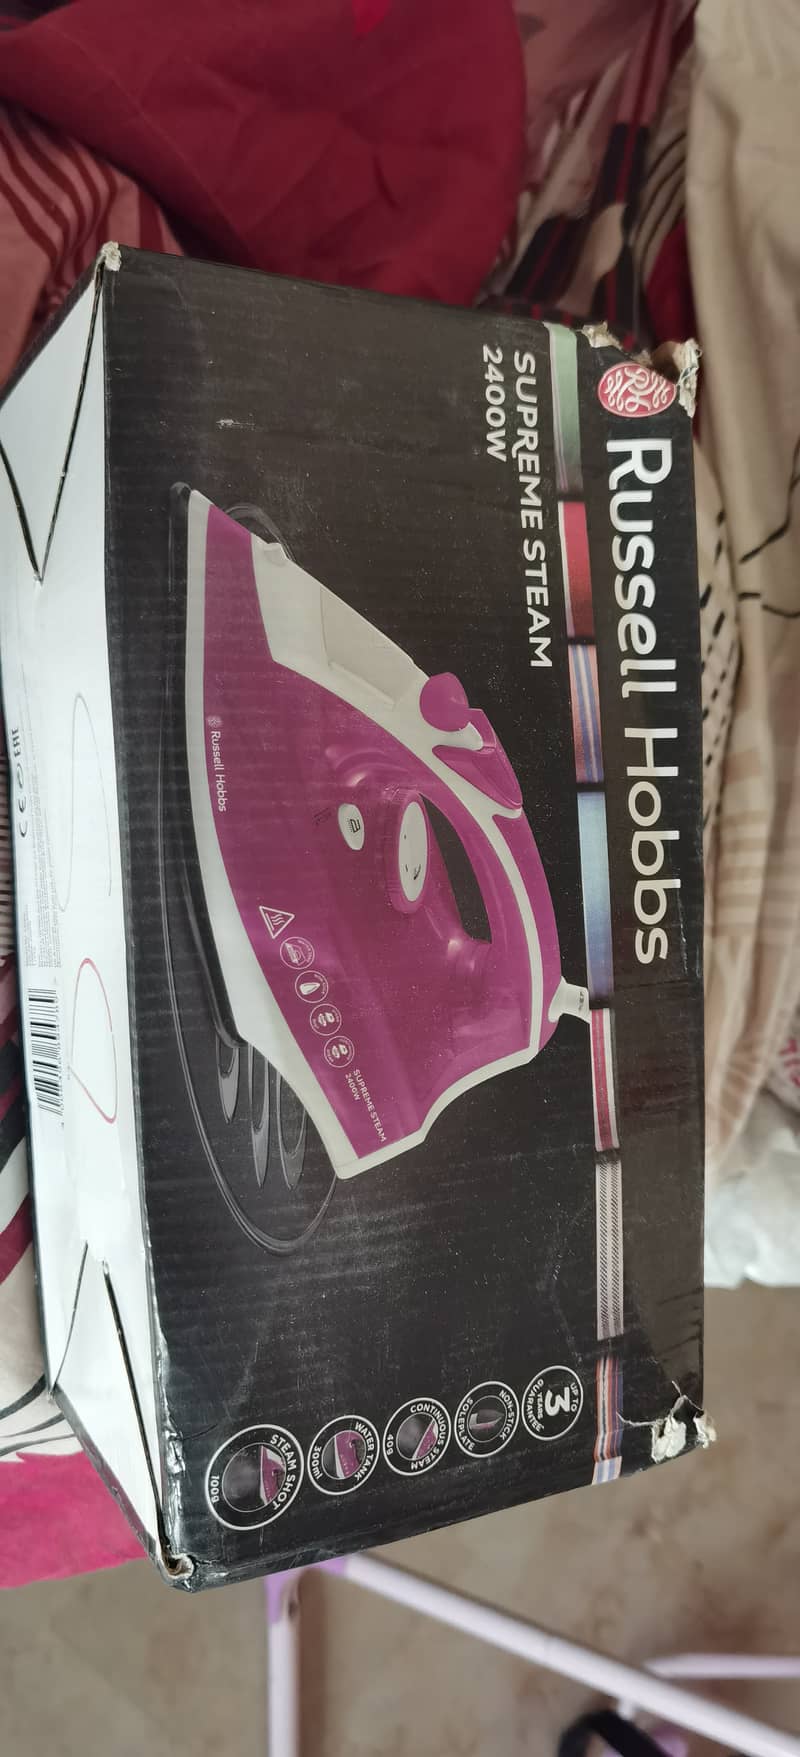 Russell hobbs iron For Sale 7